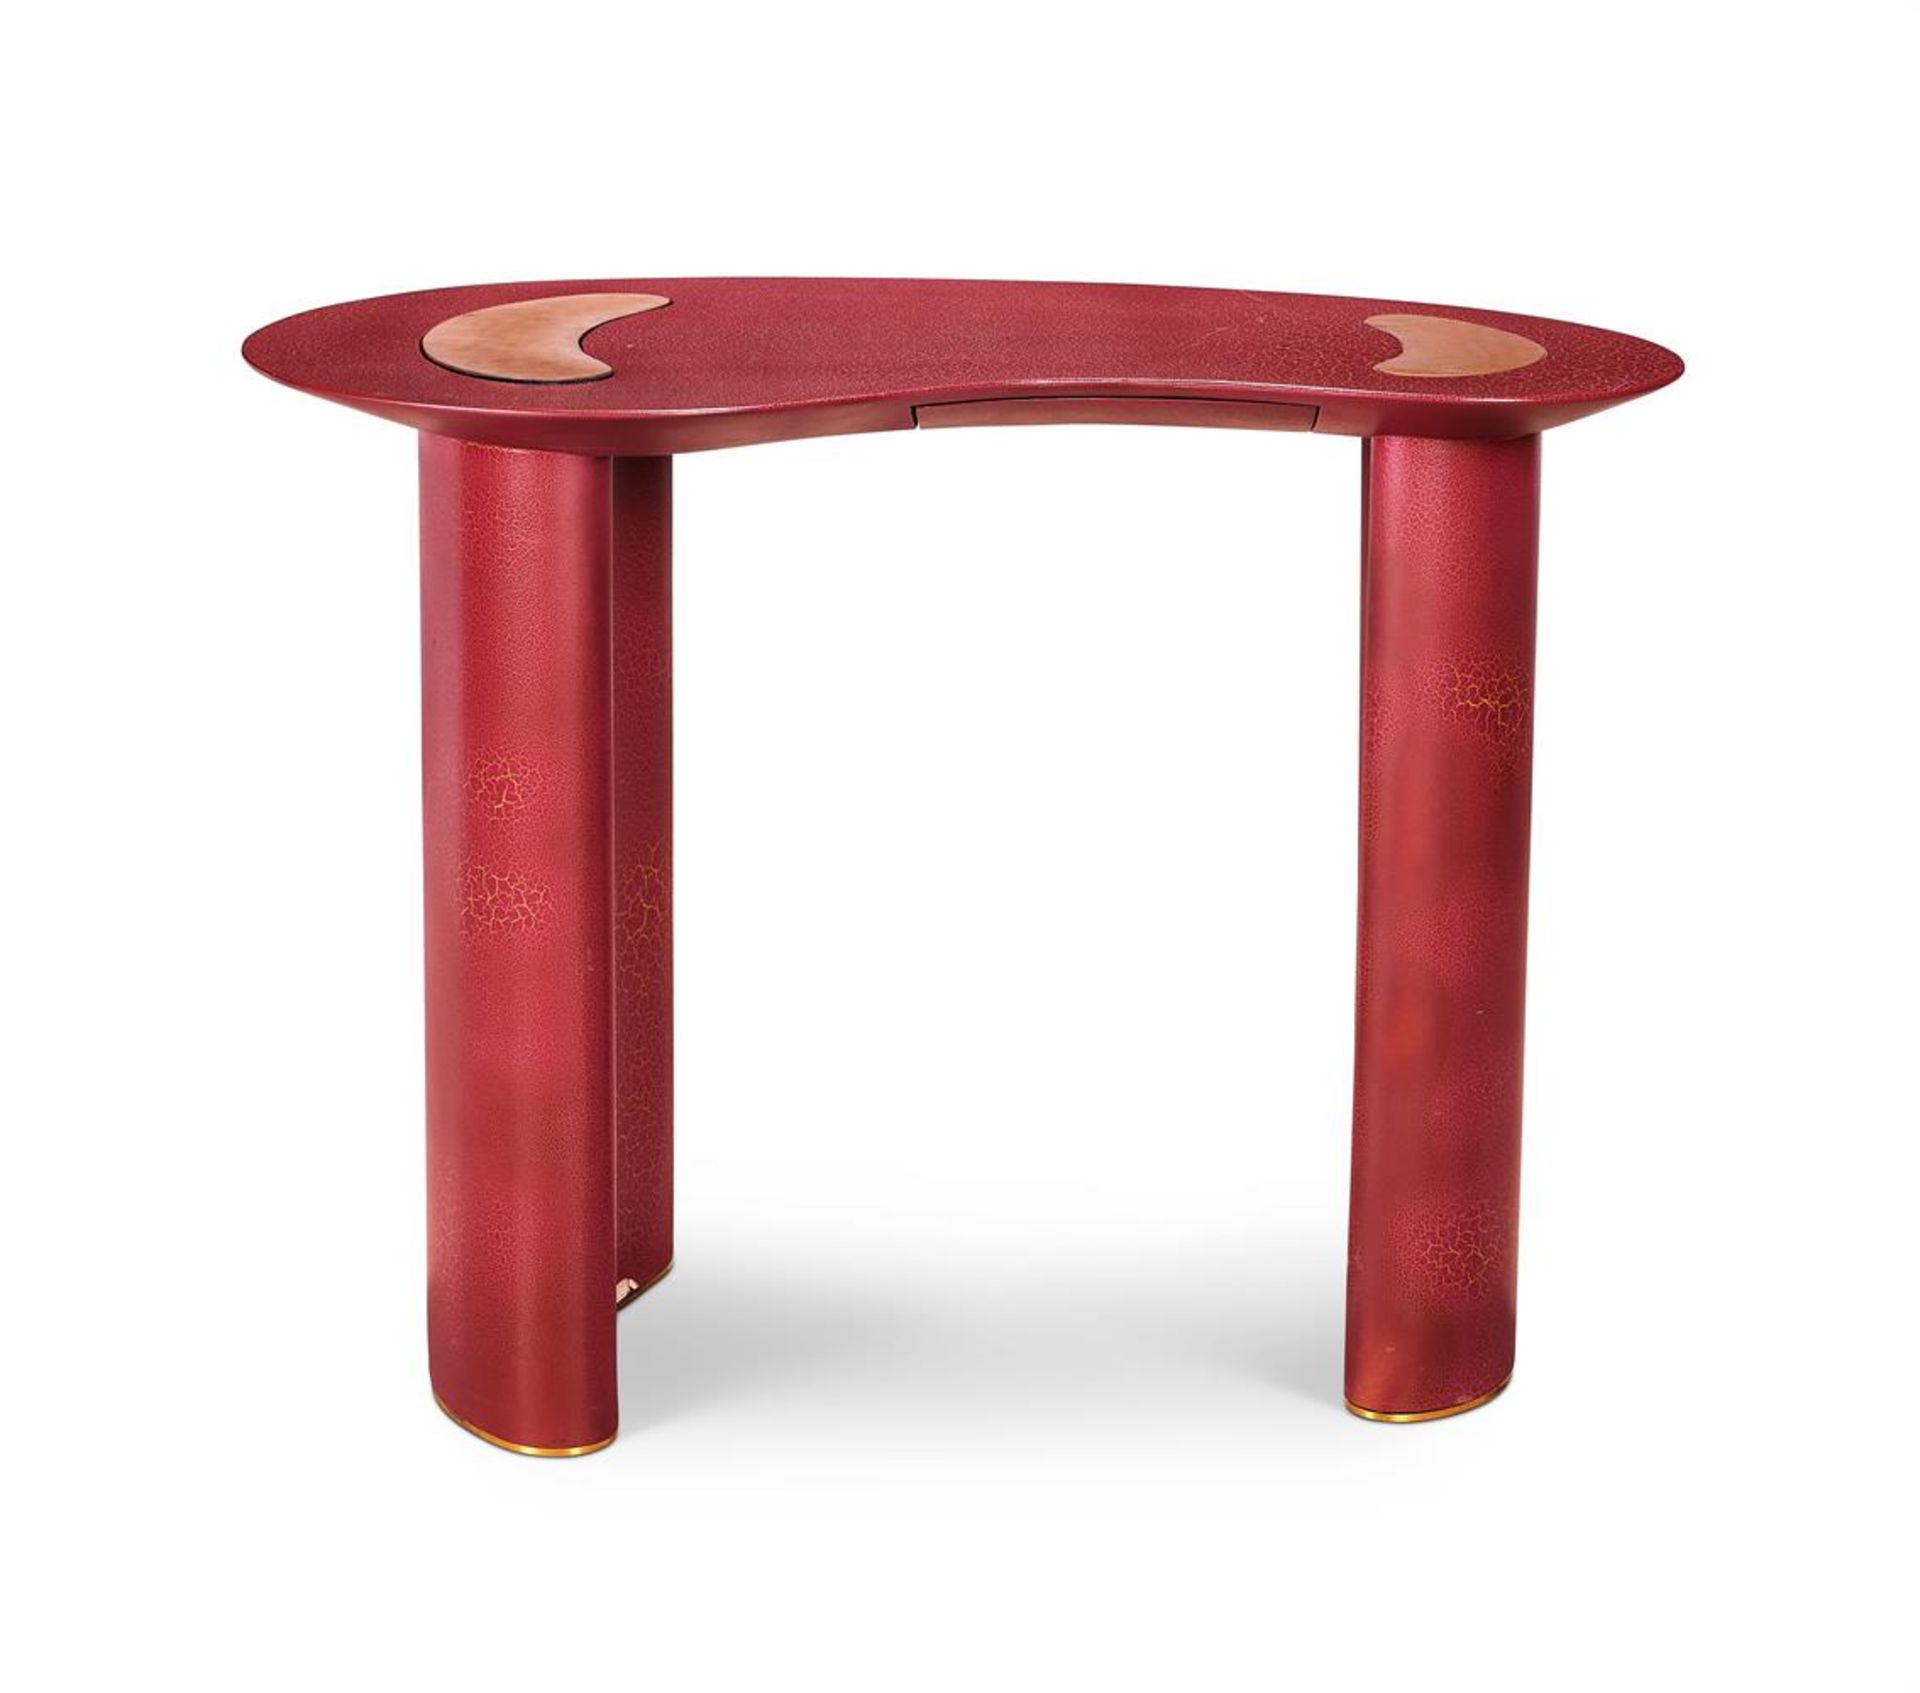 A UNIQUE BURGUNDY 'CRACKLE' LACQUERED DRESSING TABLE BY KEN BOLAN